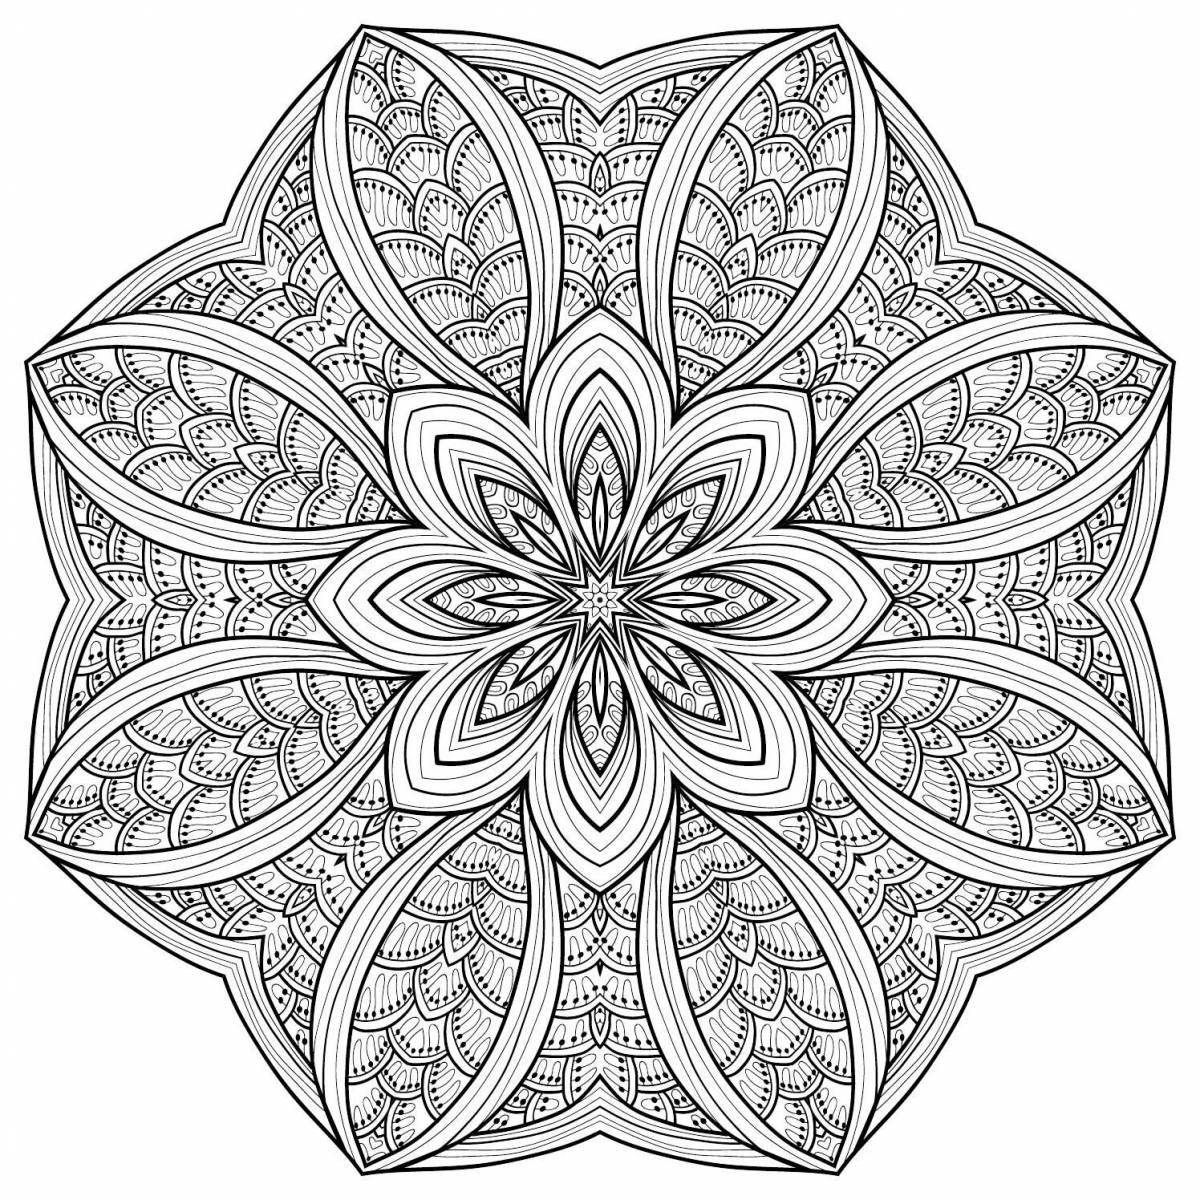 Adorable Antistress Mandala Coloring Pages for Adults en